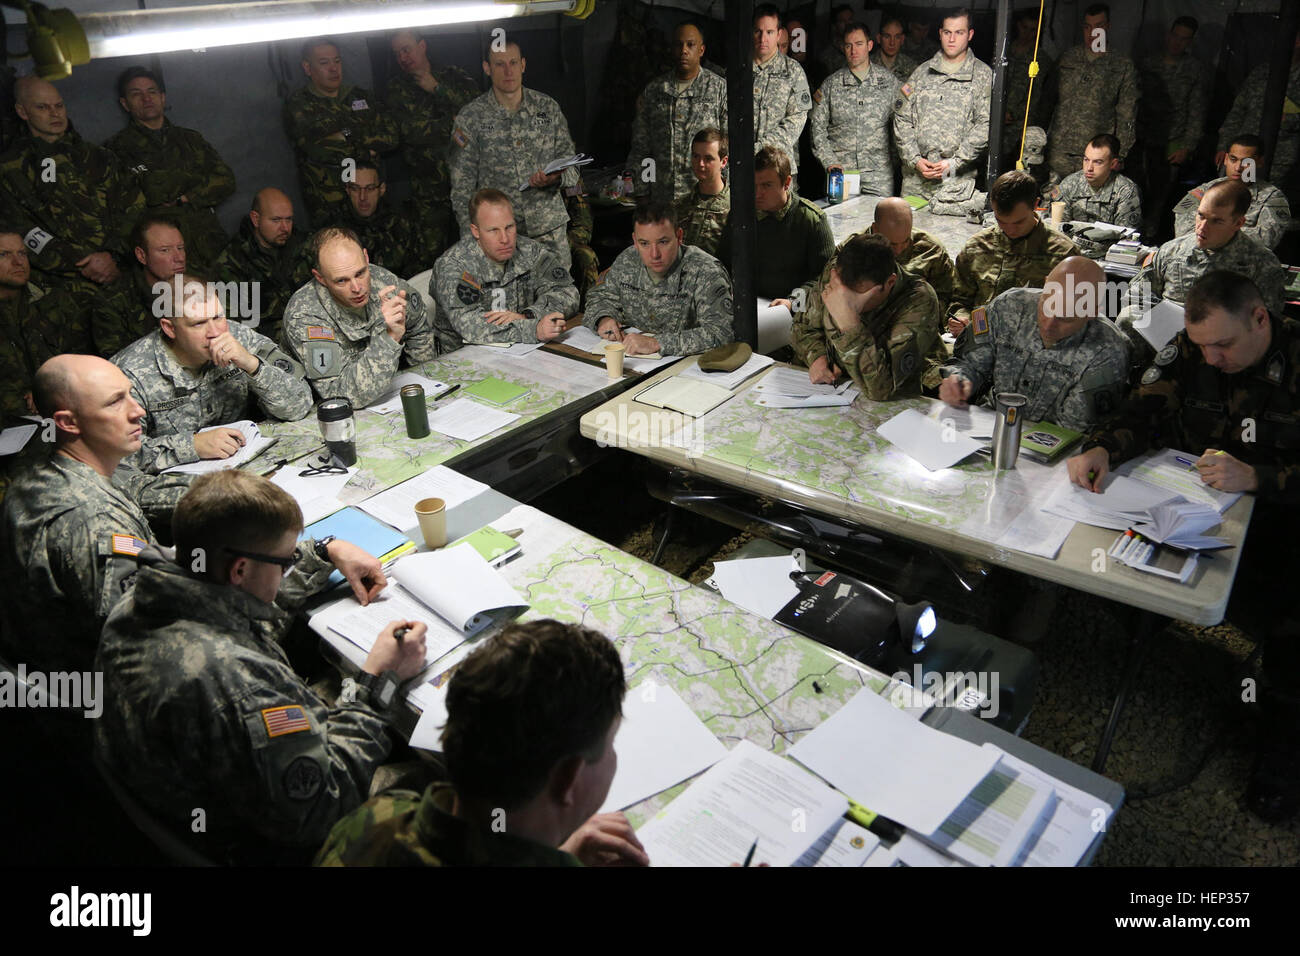 U.S. Soldiers of 2nd Cavalry Regiment lead a mission brief during exercise Allied Spirit I at the Joint Multinational Readiness Center in Hohenfels, Germany, Jan. 21, 2015. Exercise Allied Spirit includes more than 2,000 participants from Canada, Hungary, Netherlands, United Kingdom, and the U.S. Allied Spirit is exercising tactical interoperability and testing secure communications within alliance members. (U.S. Army photo by Spc. Tyler Kingsbury/Released) Allied Spirit I 150121-A-LO967-001 Stock Photo